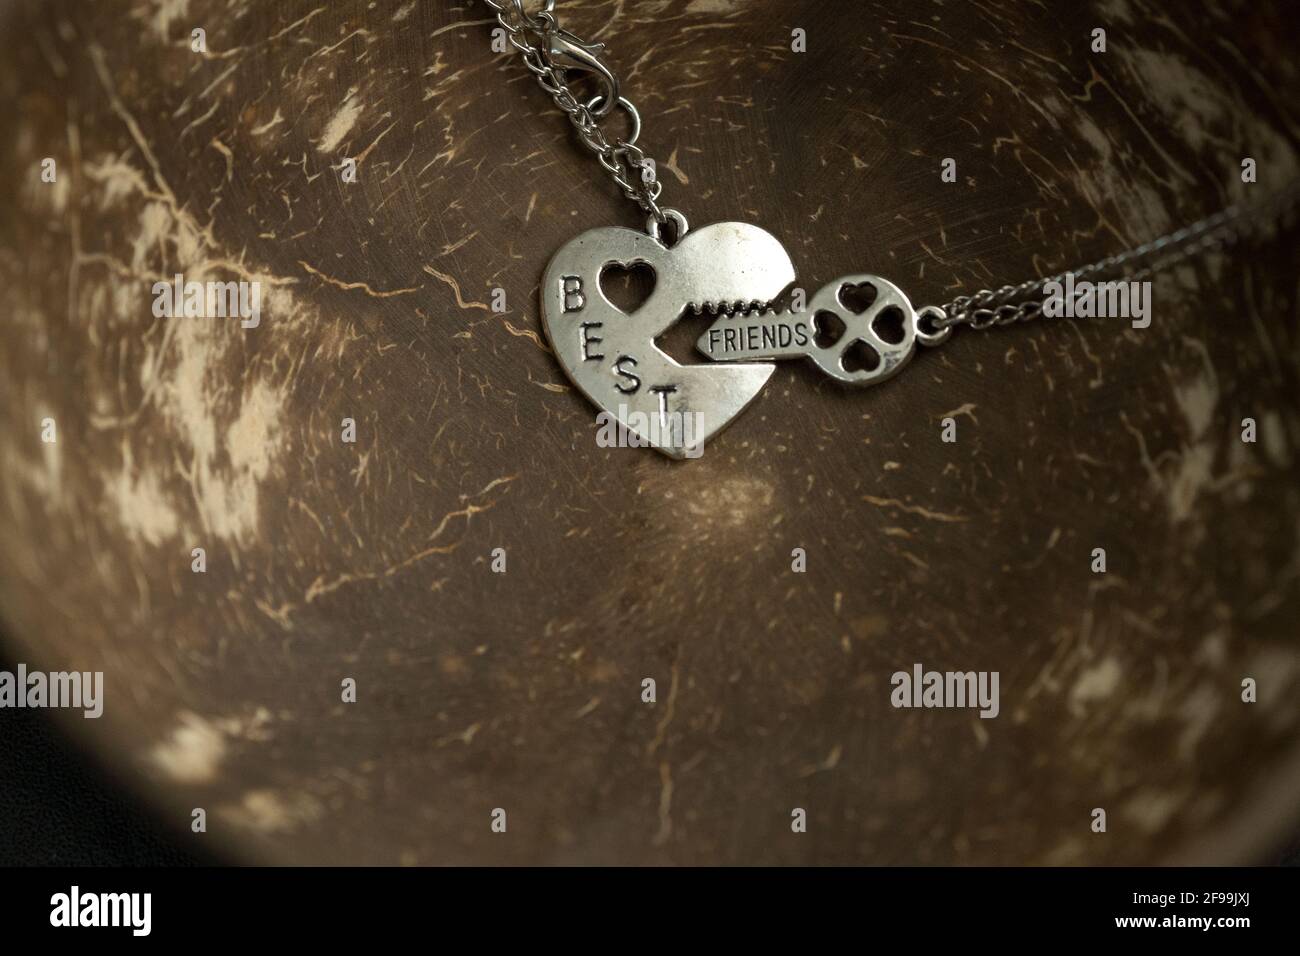 The Key To My Heart Necklace